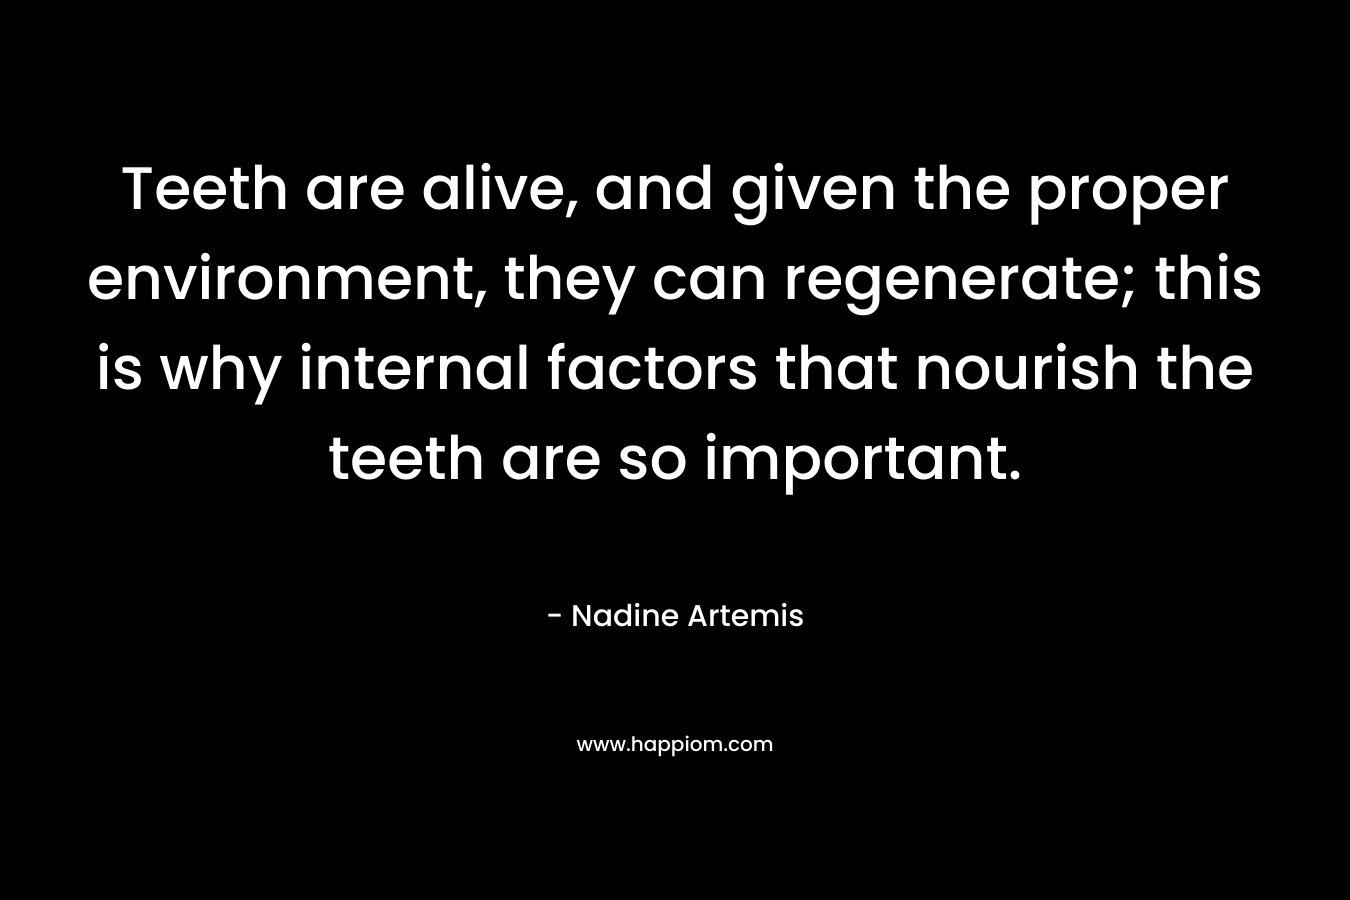 Teeth are alive, and given the proper environment, they can regenerate; this is why internal factors that nourish the teeth are so important. – Nadine Artemis